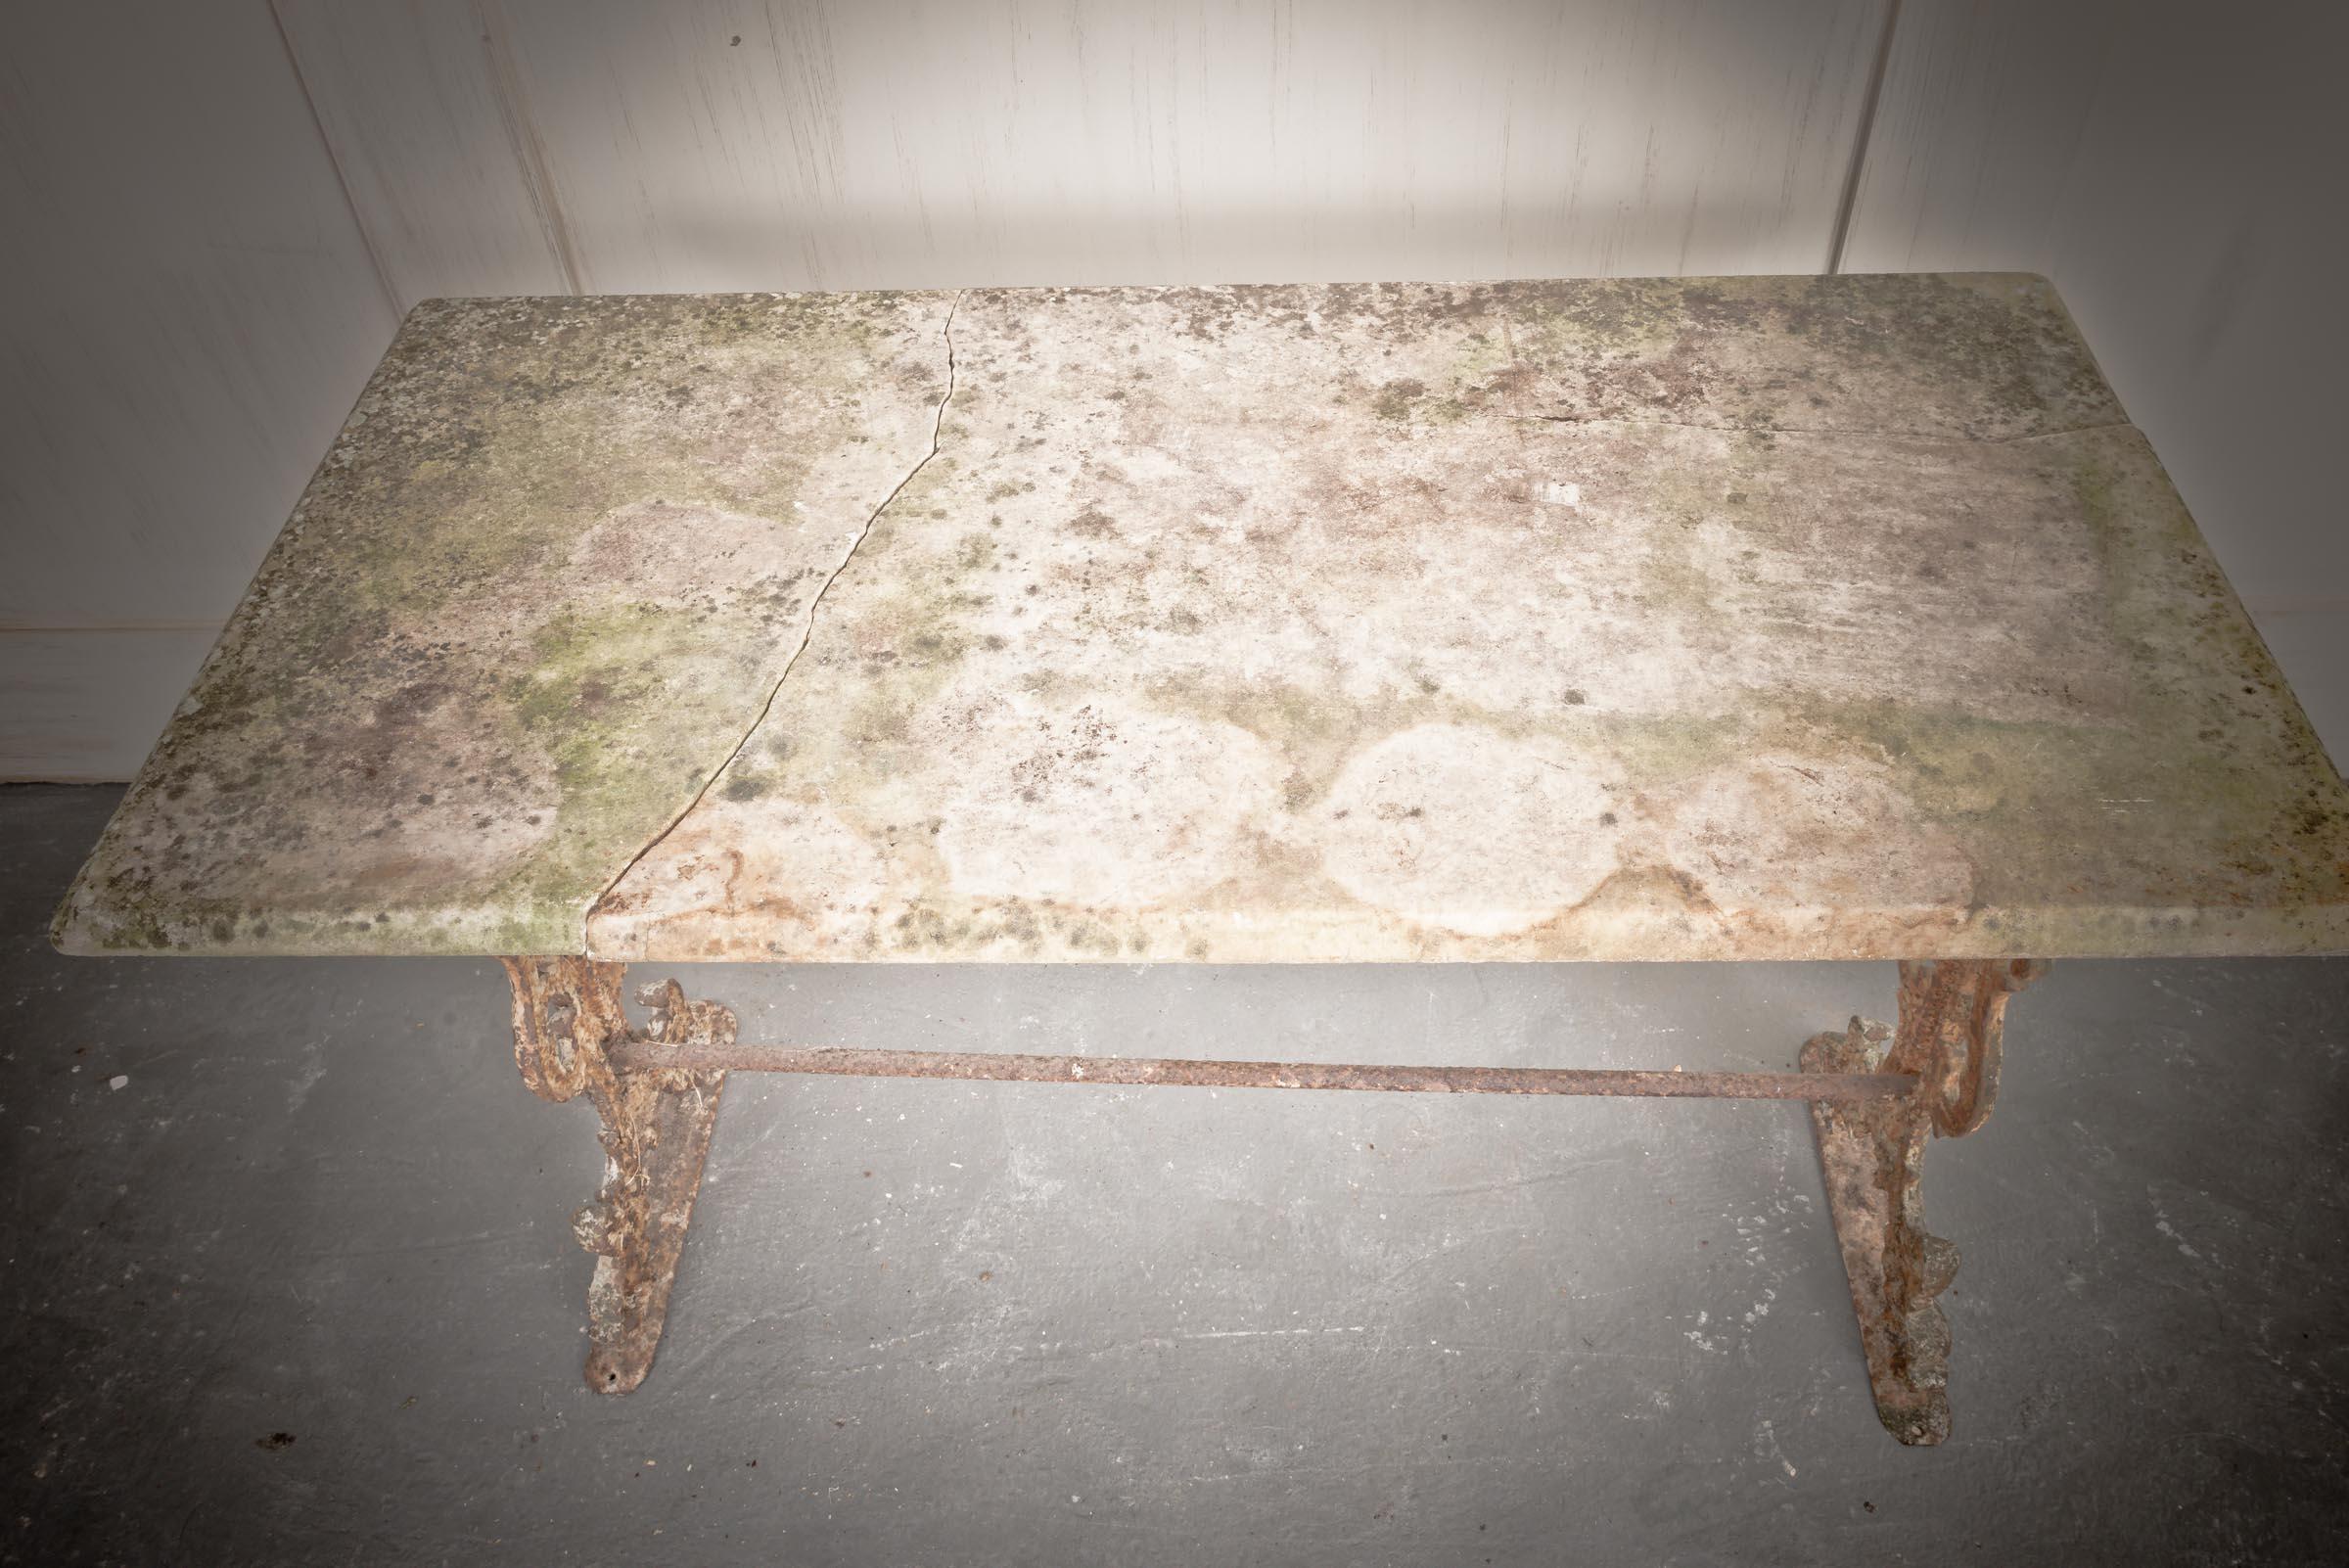 Typical of the Art Nouveau period, with its aged marble top and supported by its elaborately designed cast iron leg base, this table would be suitable for both in the garden or as a decorative piece within the home. Originally designed in the south